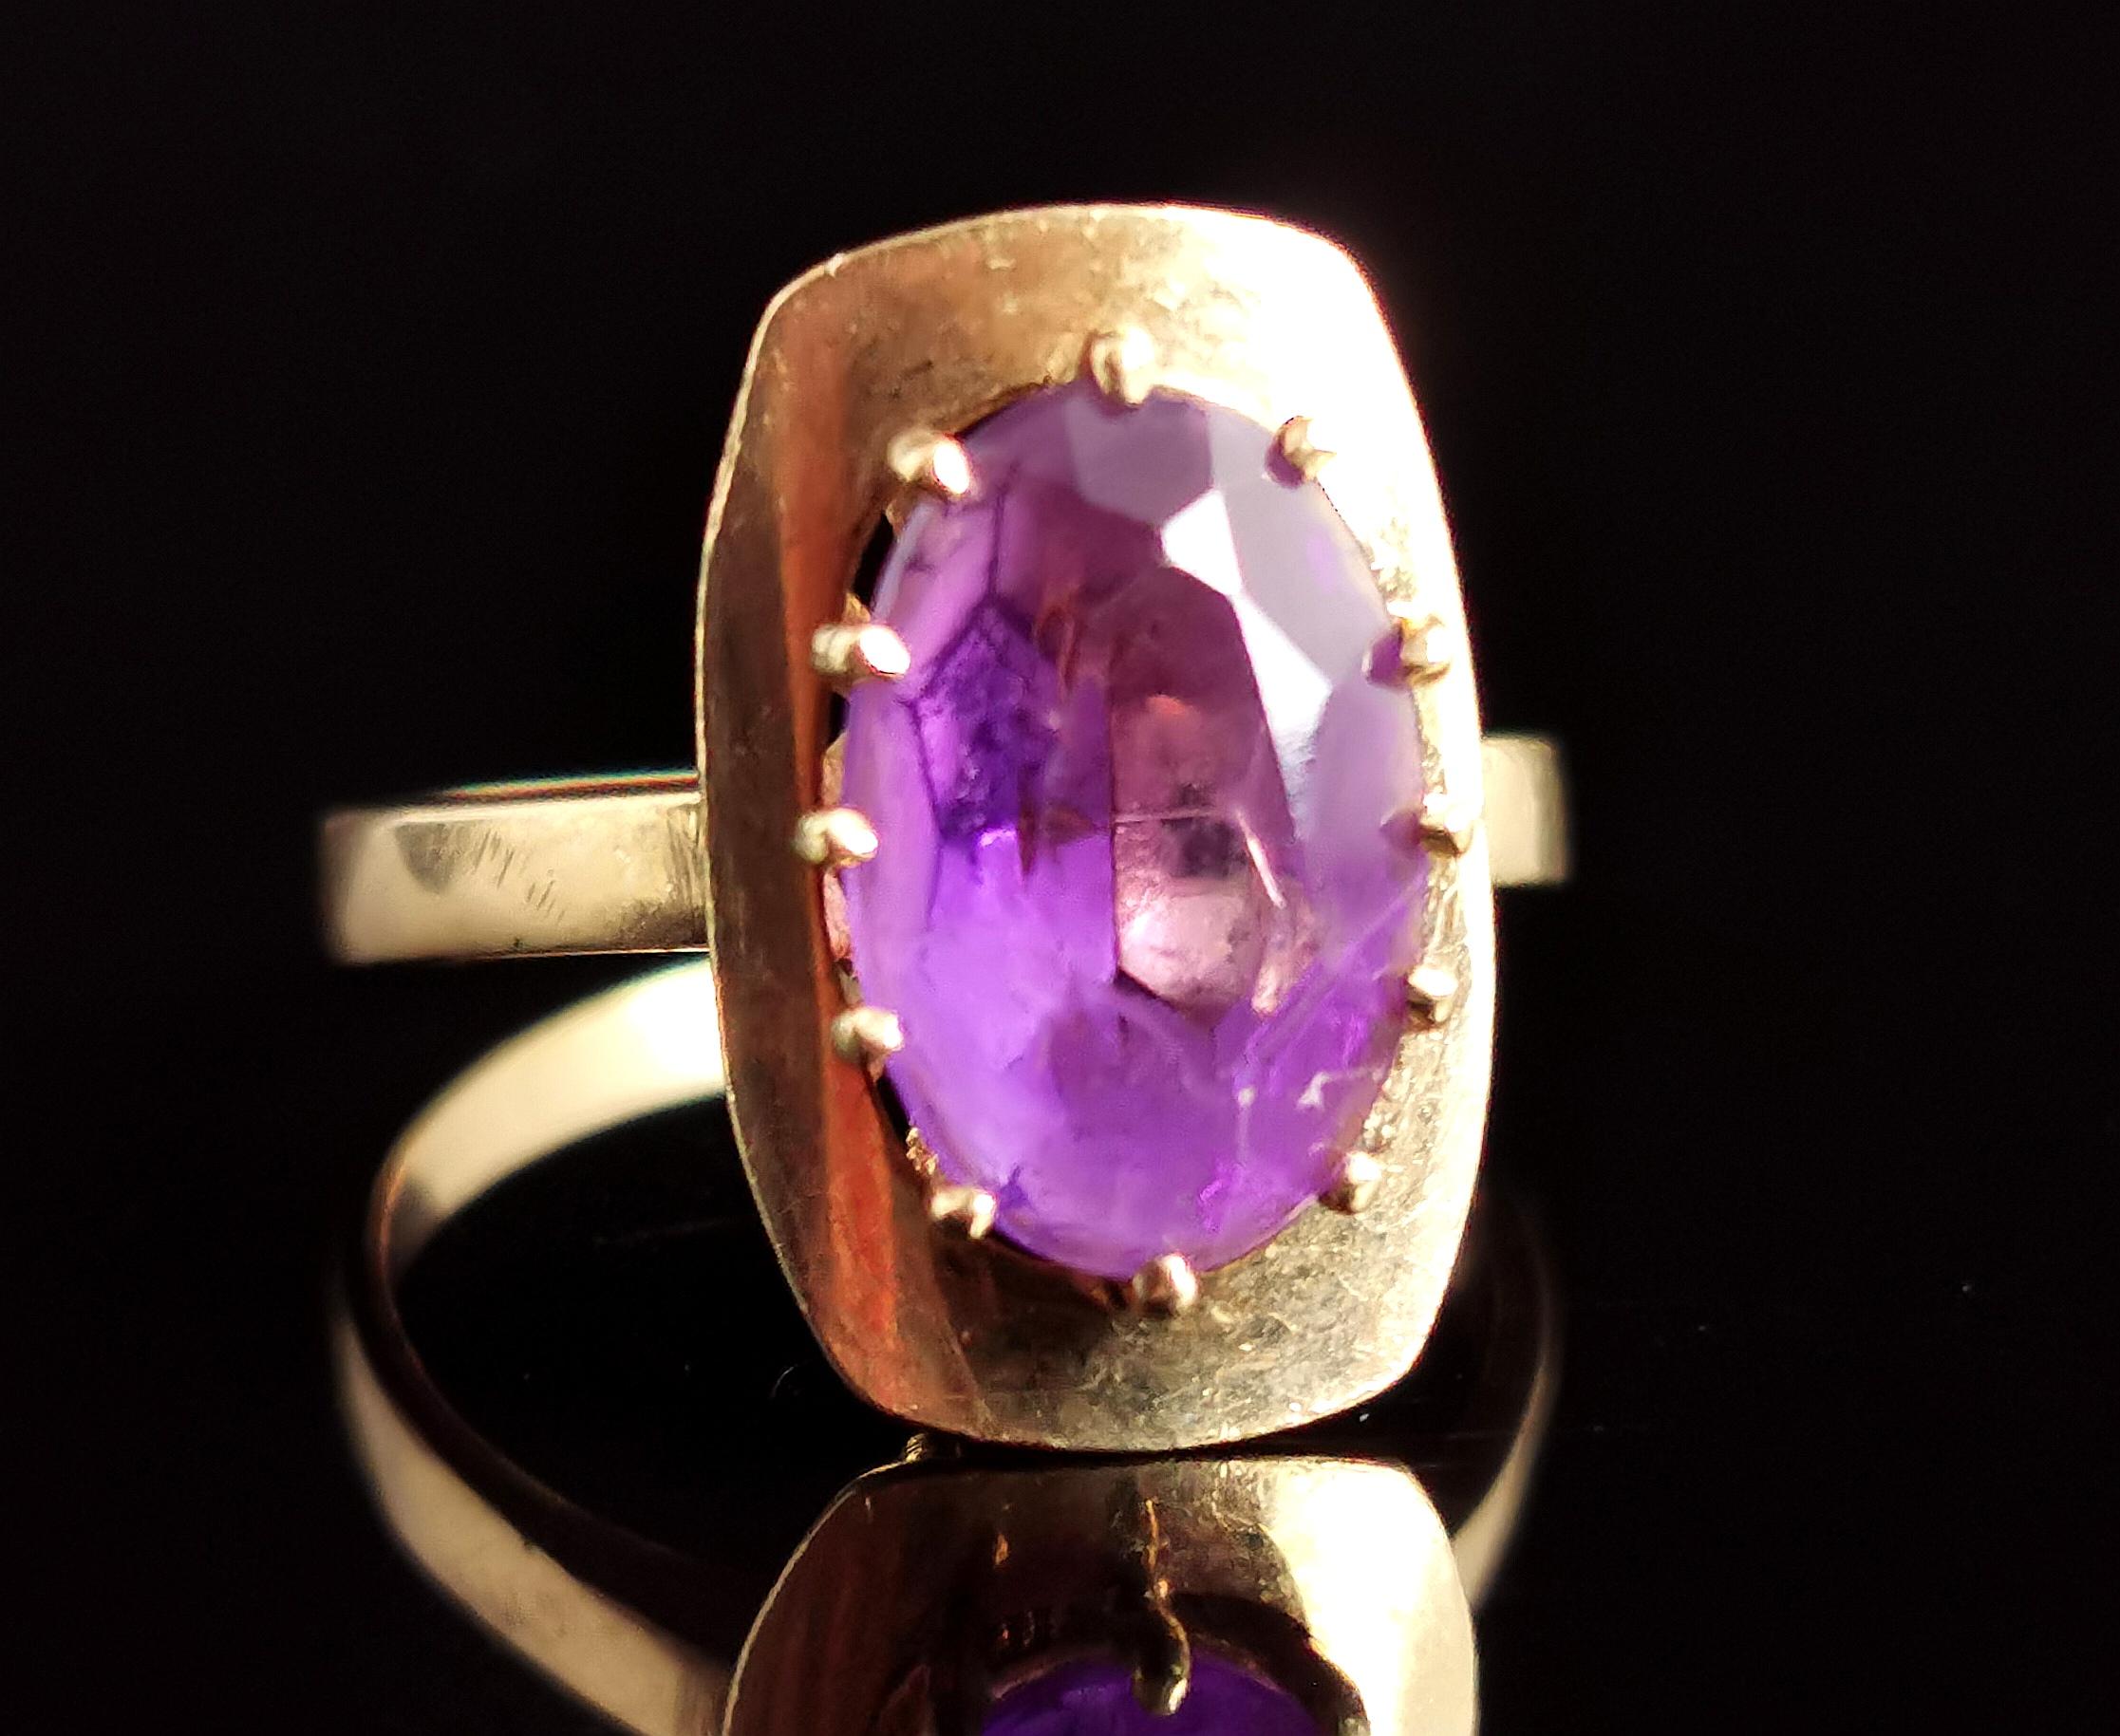 A Gorgeous vintage Amethyst cocktail ring.

This beautifully designed 1970s era cocktail ring has a large gold setting set to the centre with a vibrant oval cut purple Amethyst.

It is prong set and has a slightly abstract brutalist setting.

It has